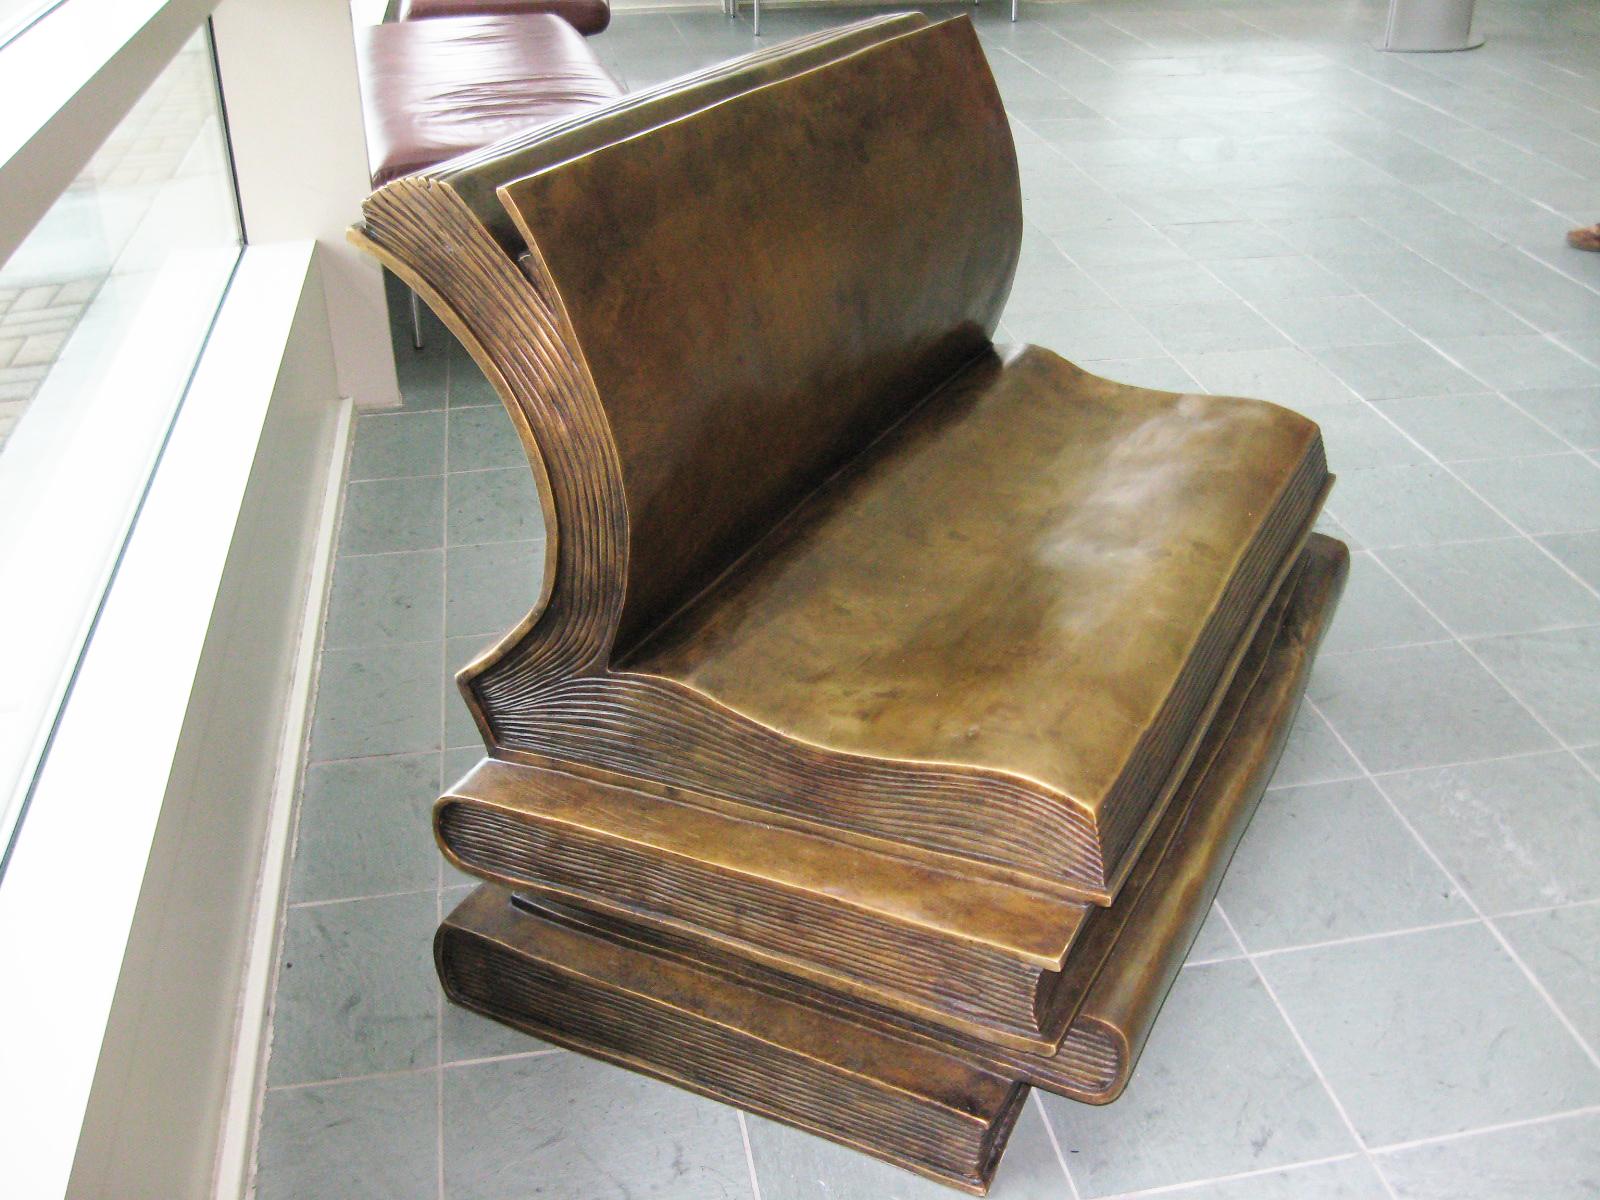 This beautifully designed limited edition lost-wax bronze book bench features four books stacked upon each other with the top book open midway. The cover of the top book artistically curves backward to act as the back rest for the bench, while the